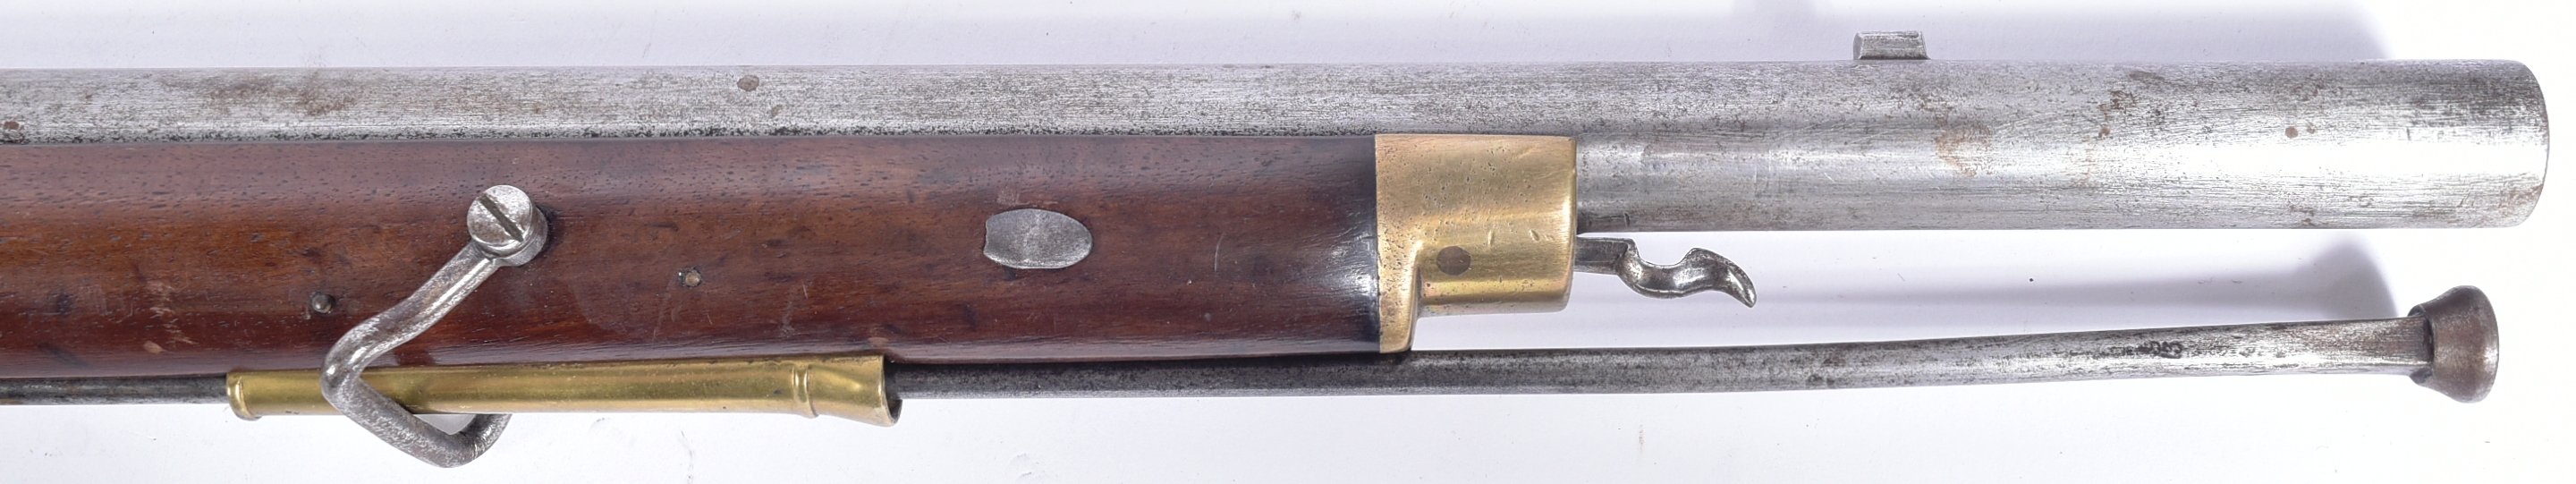 ARMS - 19TH CENTURY EAST INDIA COMPANY PERCUSSION MUSKET - Image 5 of 5